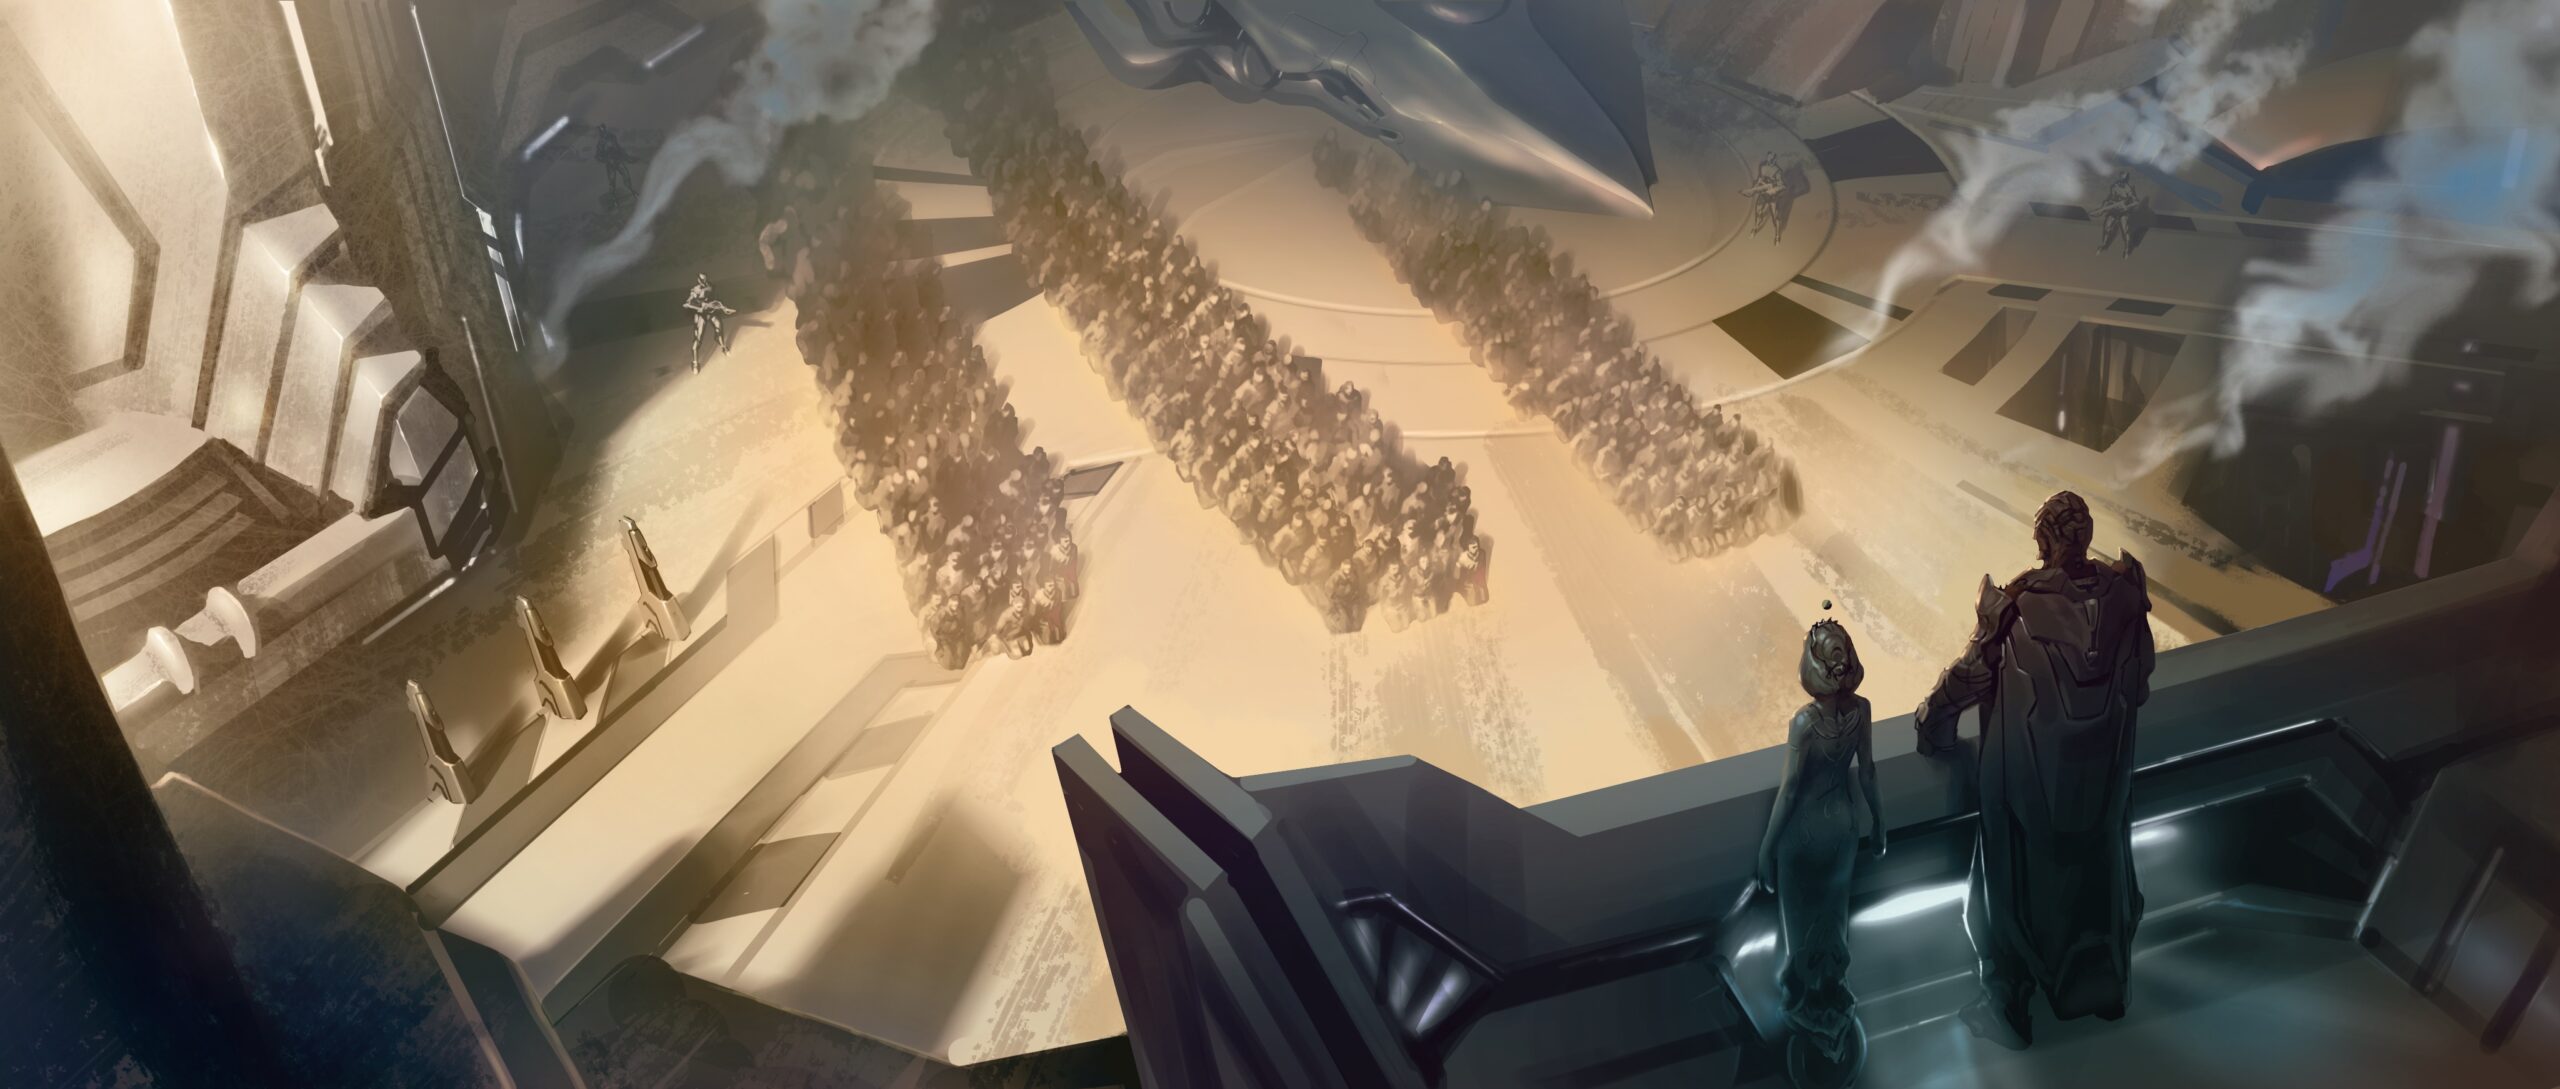 Halo 4 concept art of the Didact and Librarian overlooking rows of captured and defeated Ancestors on Charum Hakkor